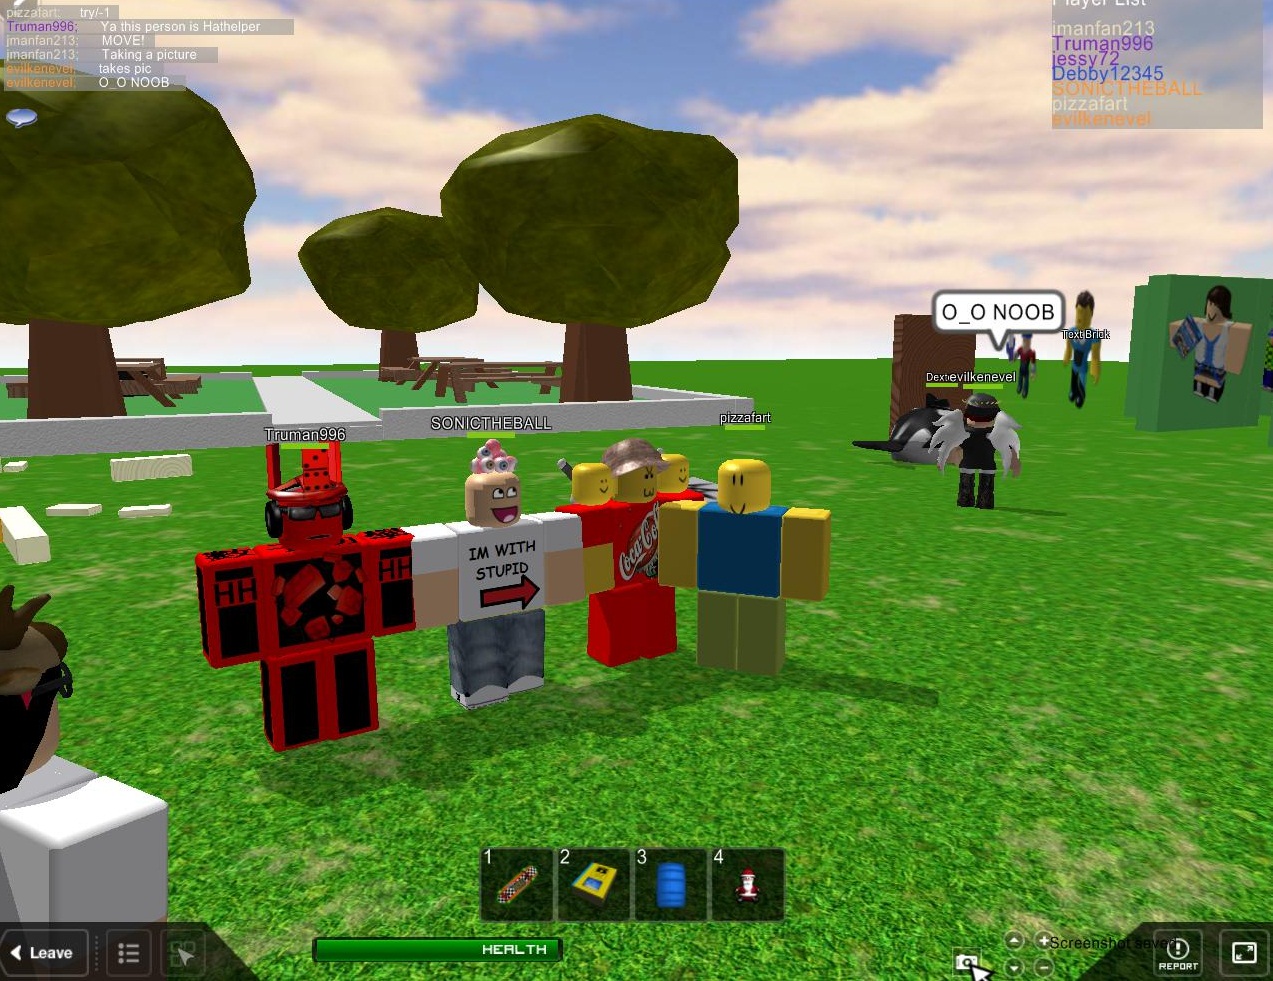 Games Like Roblox Virtual Worlds For Teens